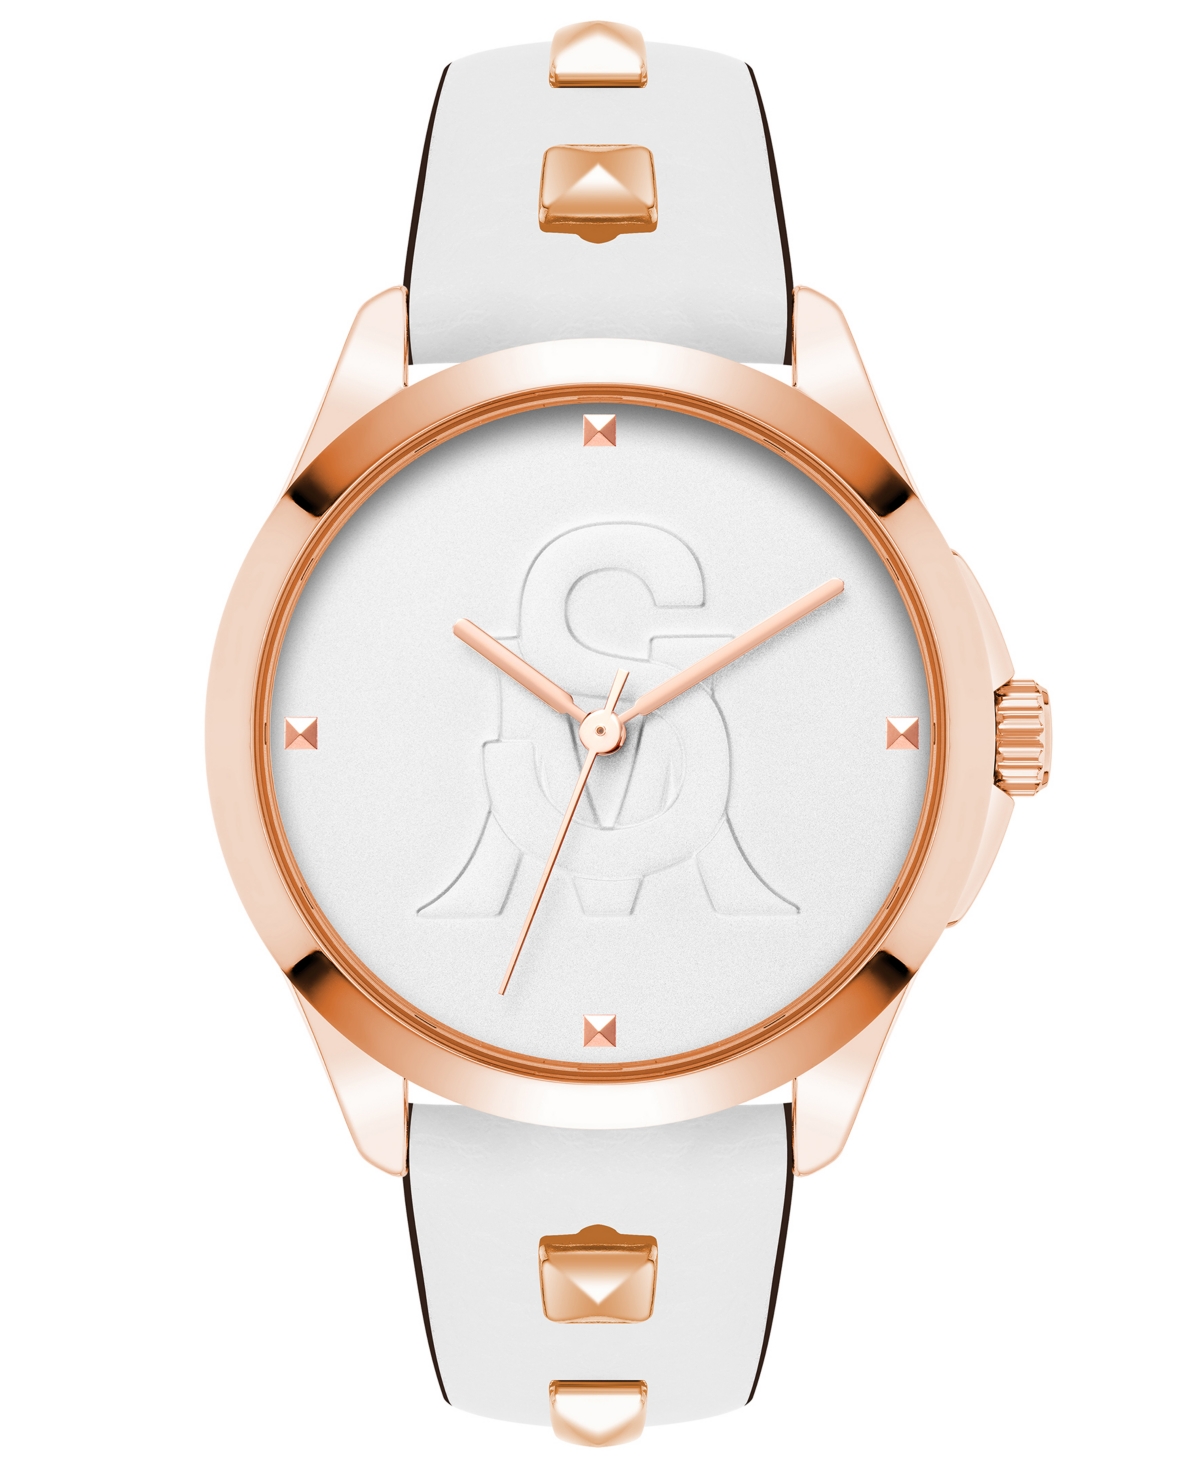 Women's Analog White Synthetic Leather with Rose Gold-Tone Alloy Accents Strap Watch, 38mm - Rose Gold-Tone, White